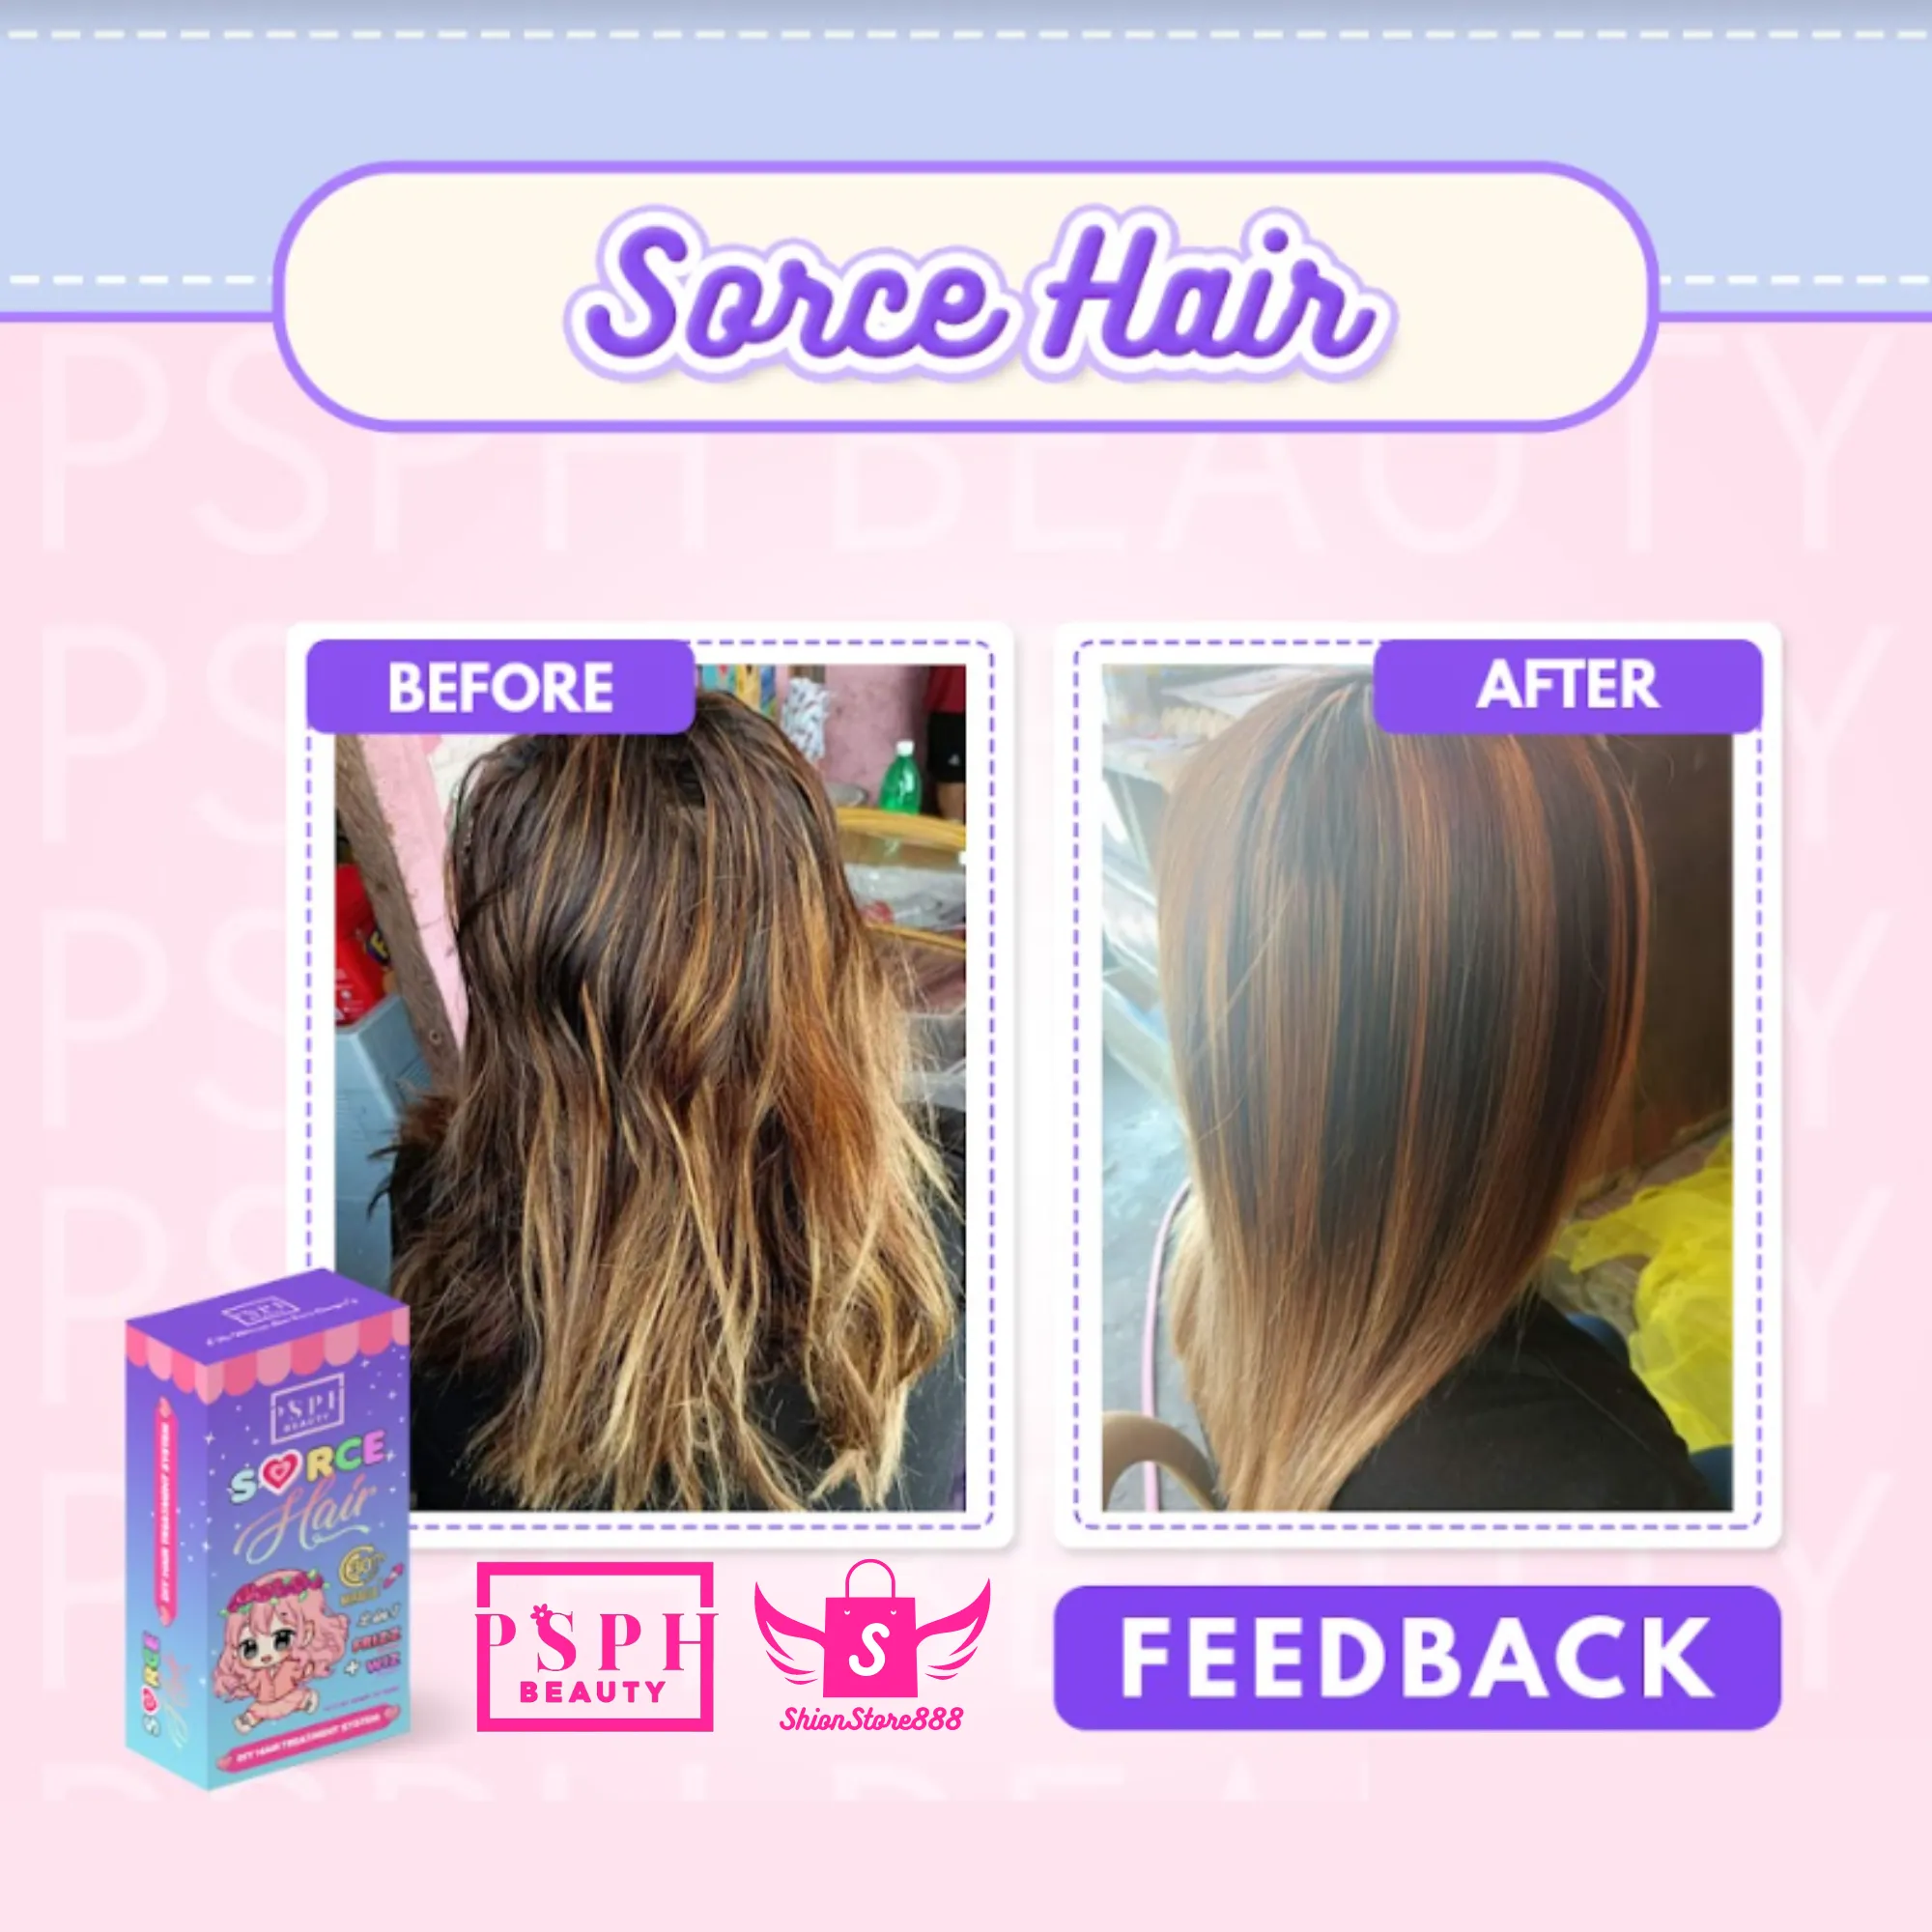 ShionStore888 Sorce Hair DIY Hair Treatment by PSPH Beauty Easy to Use Salon  Quality Hair Treatment at Home for All Hair Types Rebonded, with Hair  Color, Frizzy Hair, Bleached Hair | Lazada